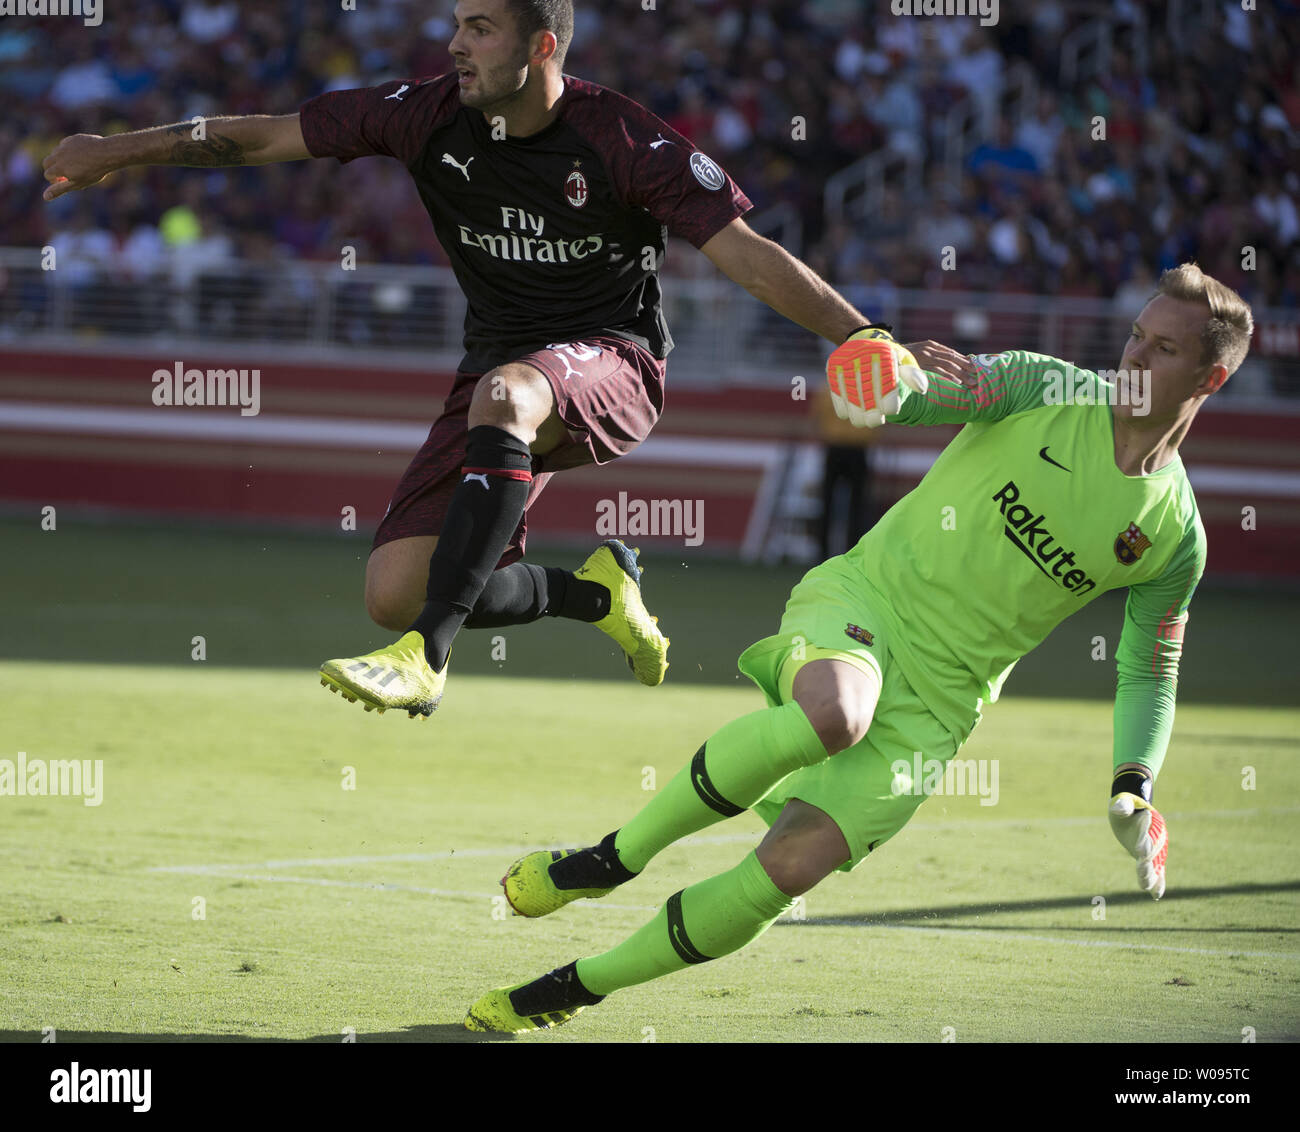 A.C. Milan's Patrick Cutrone (L) leaps over F.C. Barcelona goalie  Jasper Cillessen in the second half of International Champions Cup soccer at Levi's Stadium in Santa Clara, California on August 4, 2018.  Milan won 1-0.    Photo by Terry Schmitt/UPI Stock Photo